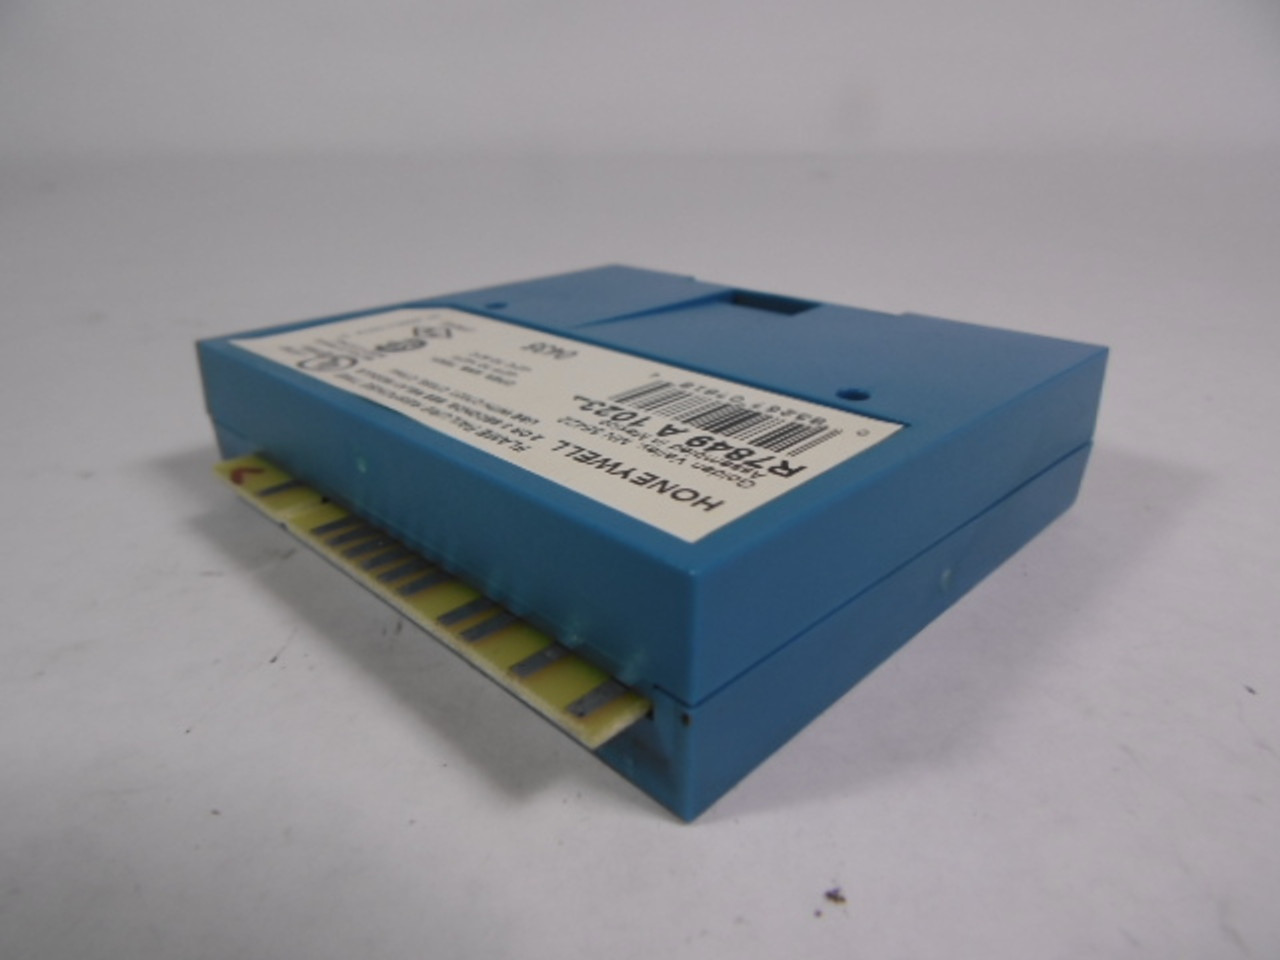 Honeywell R7849A-1023 Ultraviolet Flame Amplifier USED